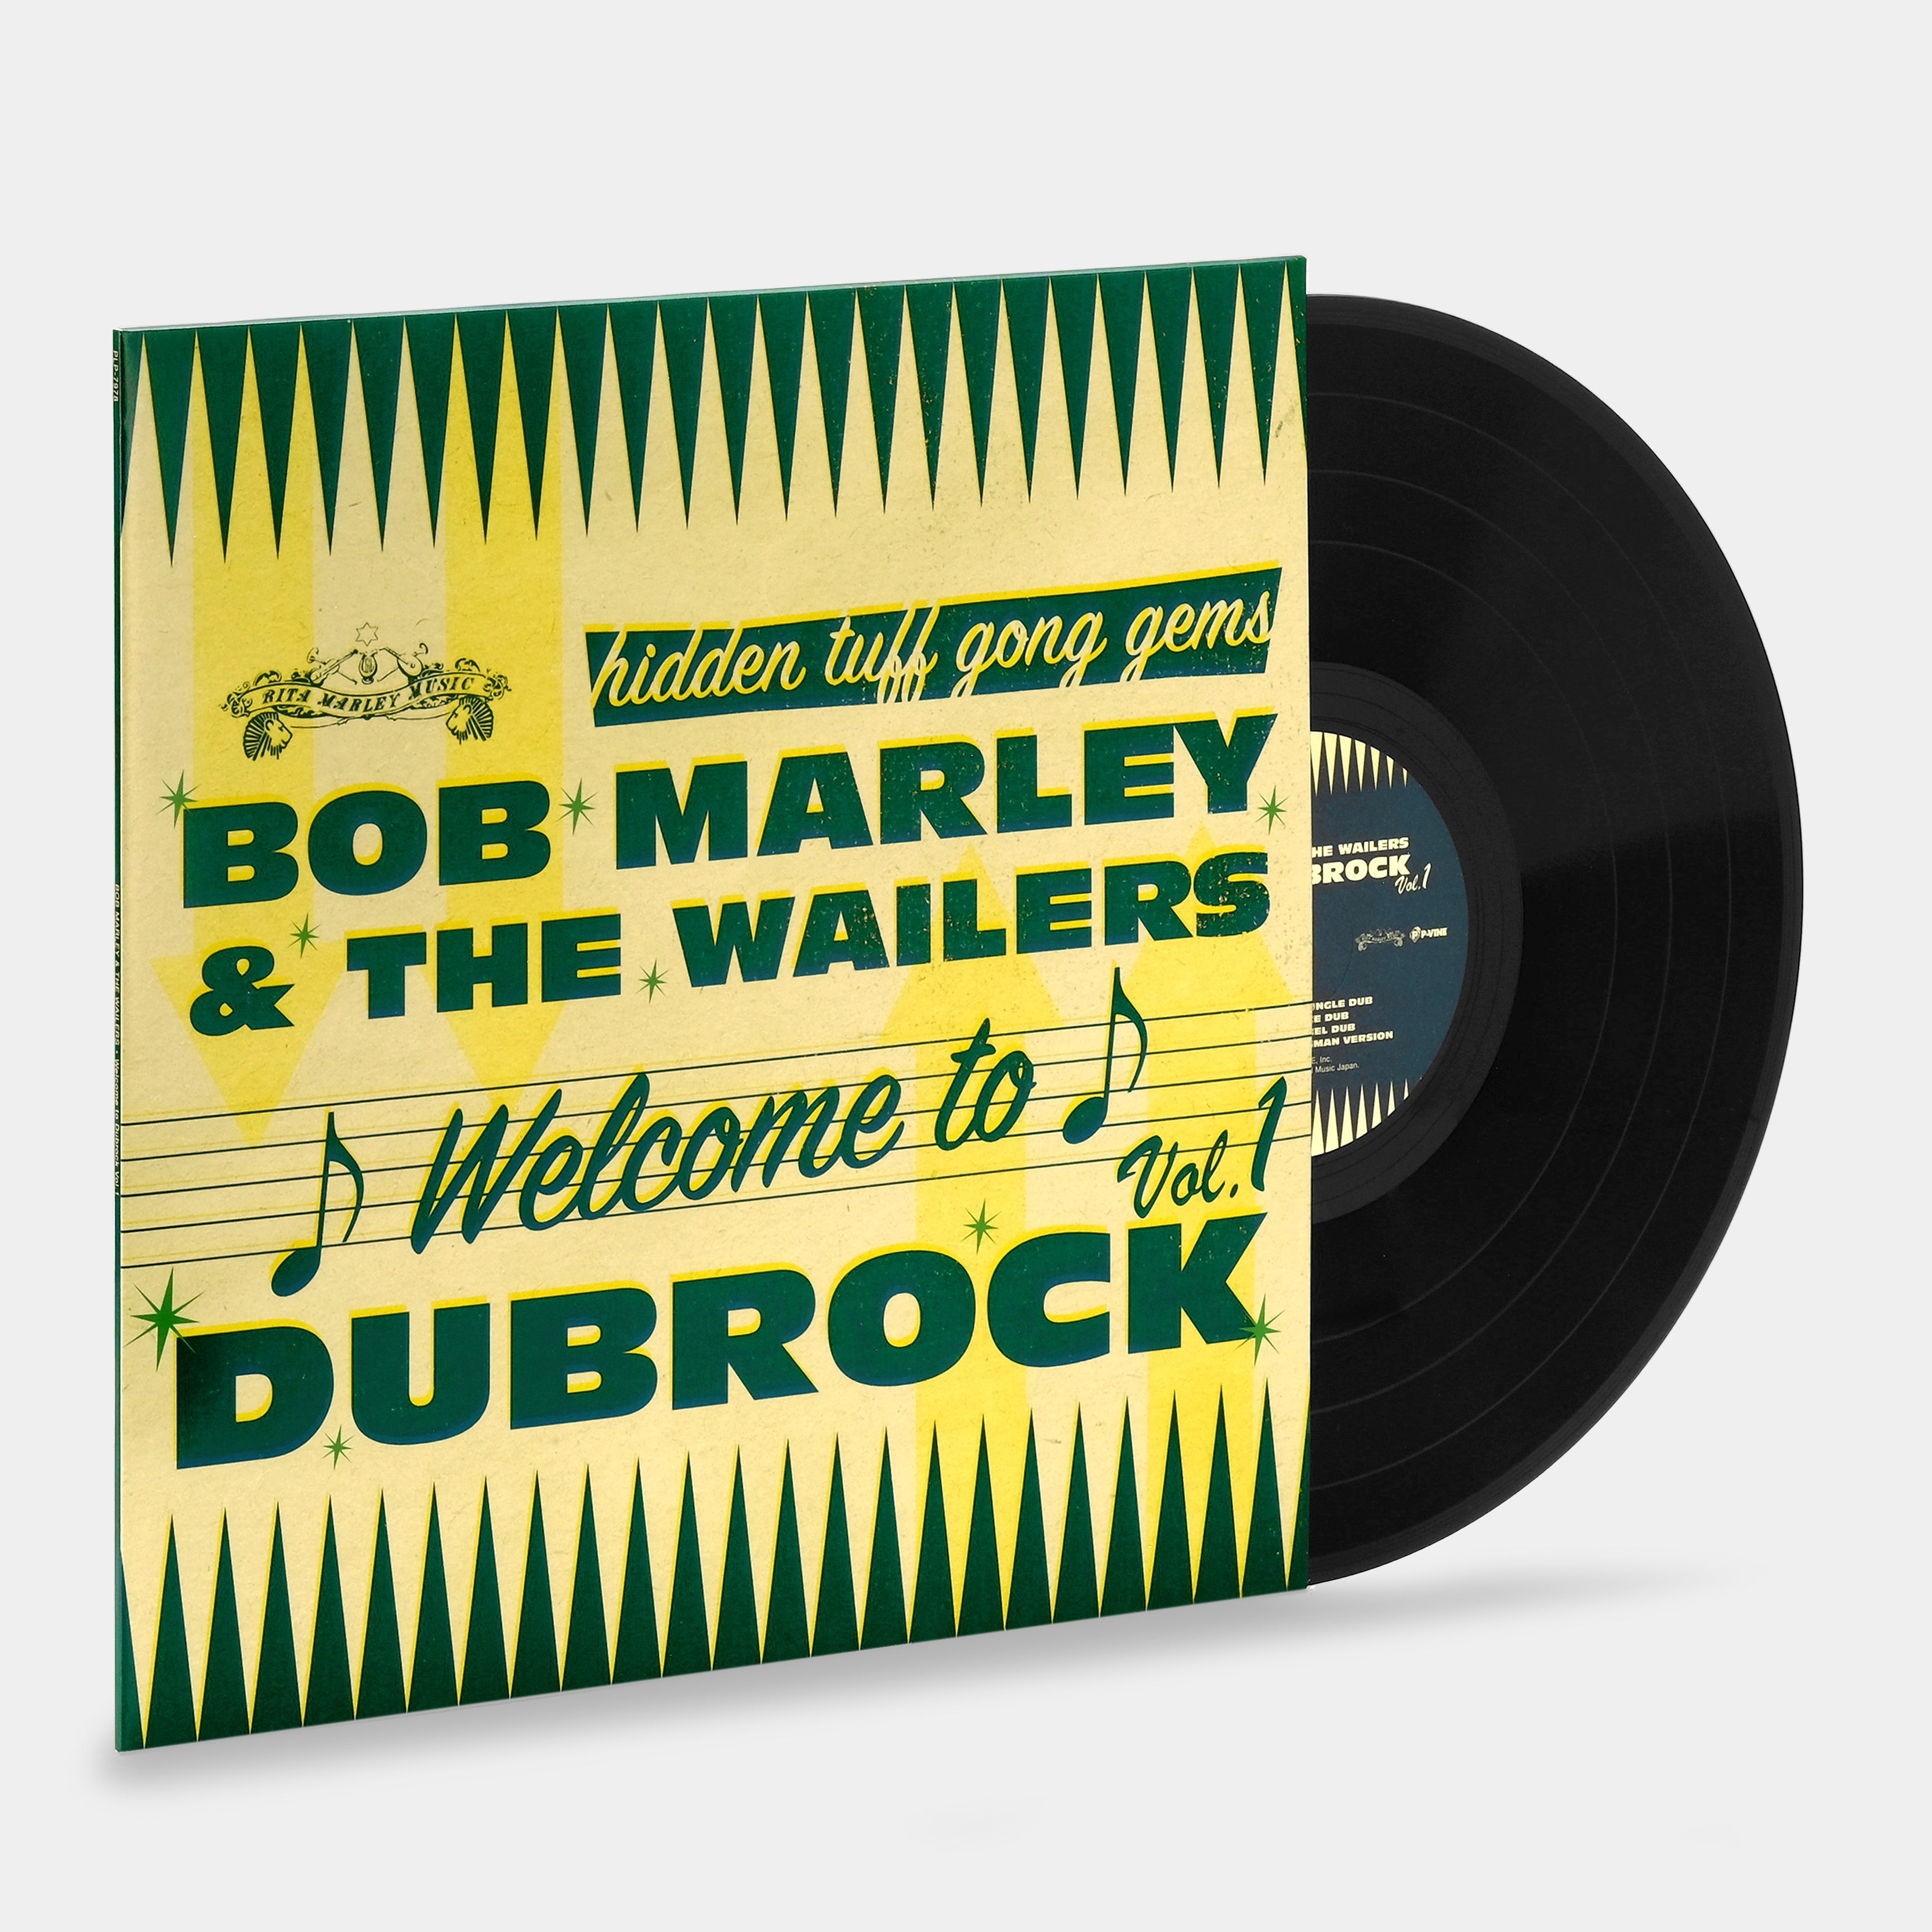 Bob Marley & The Wailers - Welcome To Dubrock Vol. 1 LP Vinyl Record